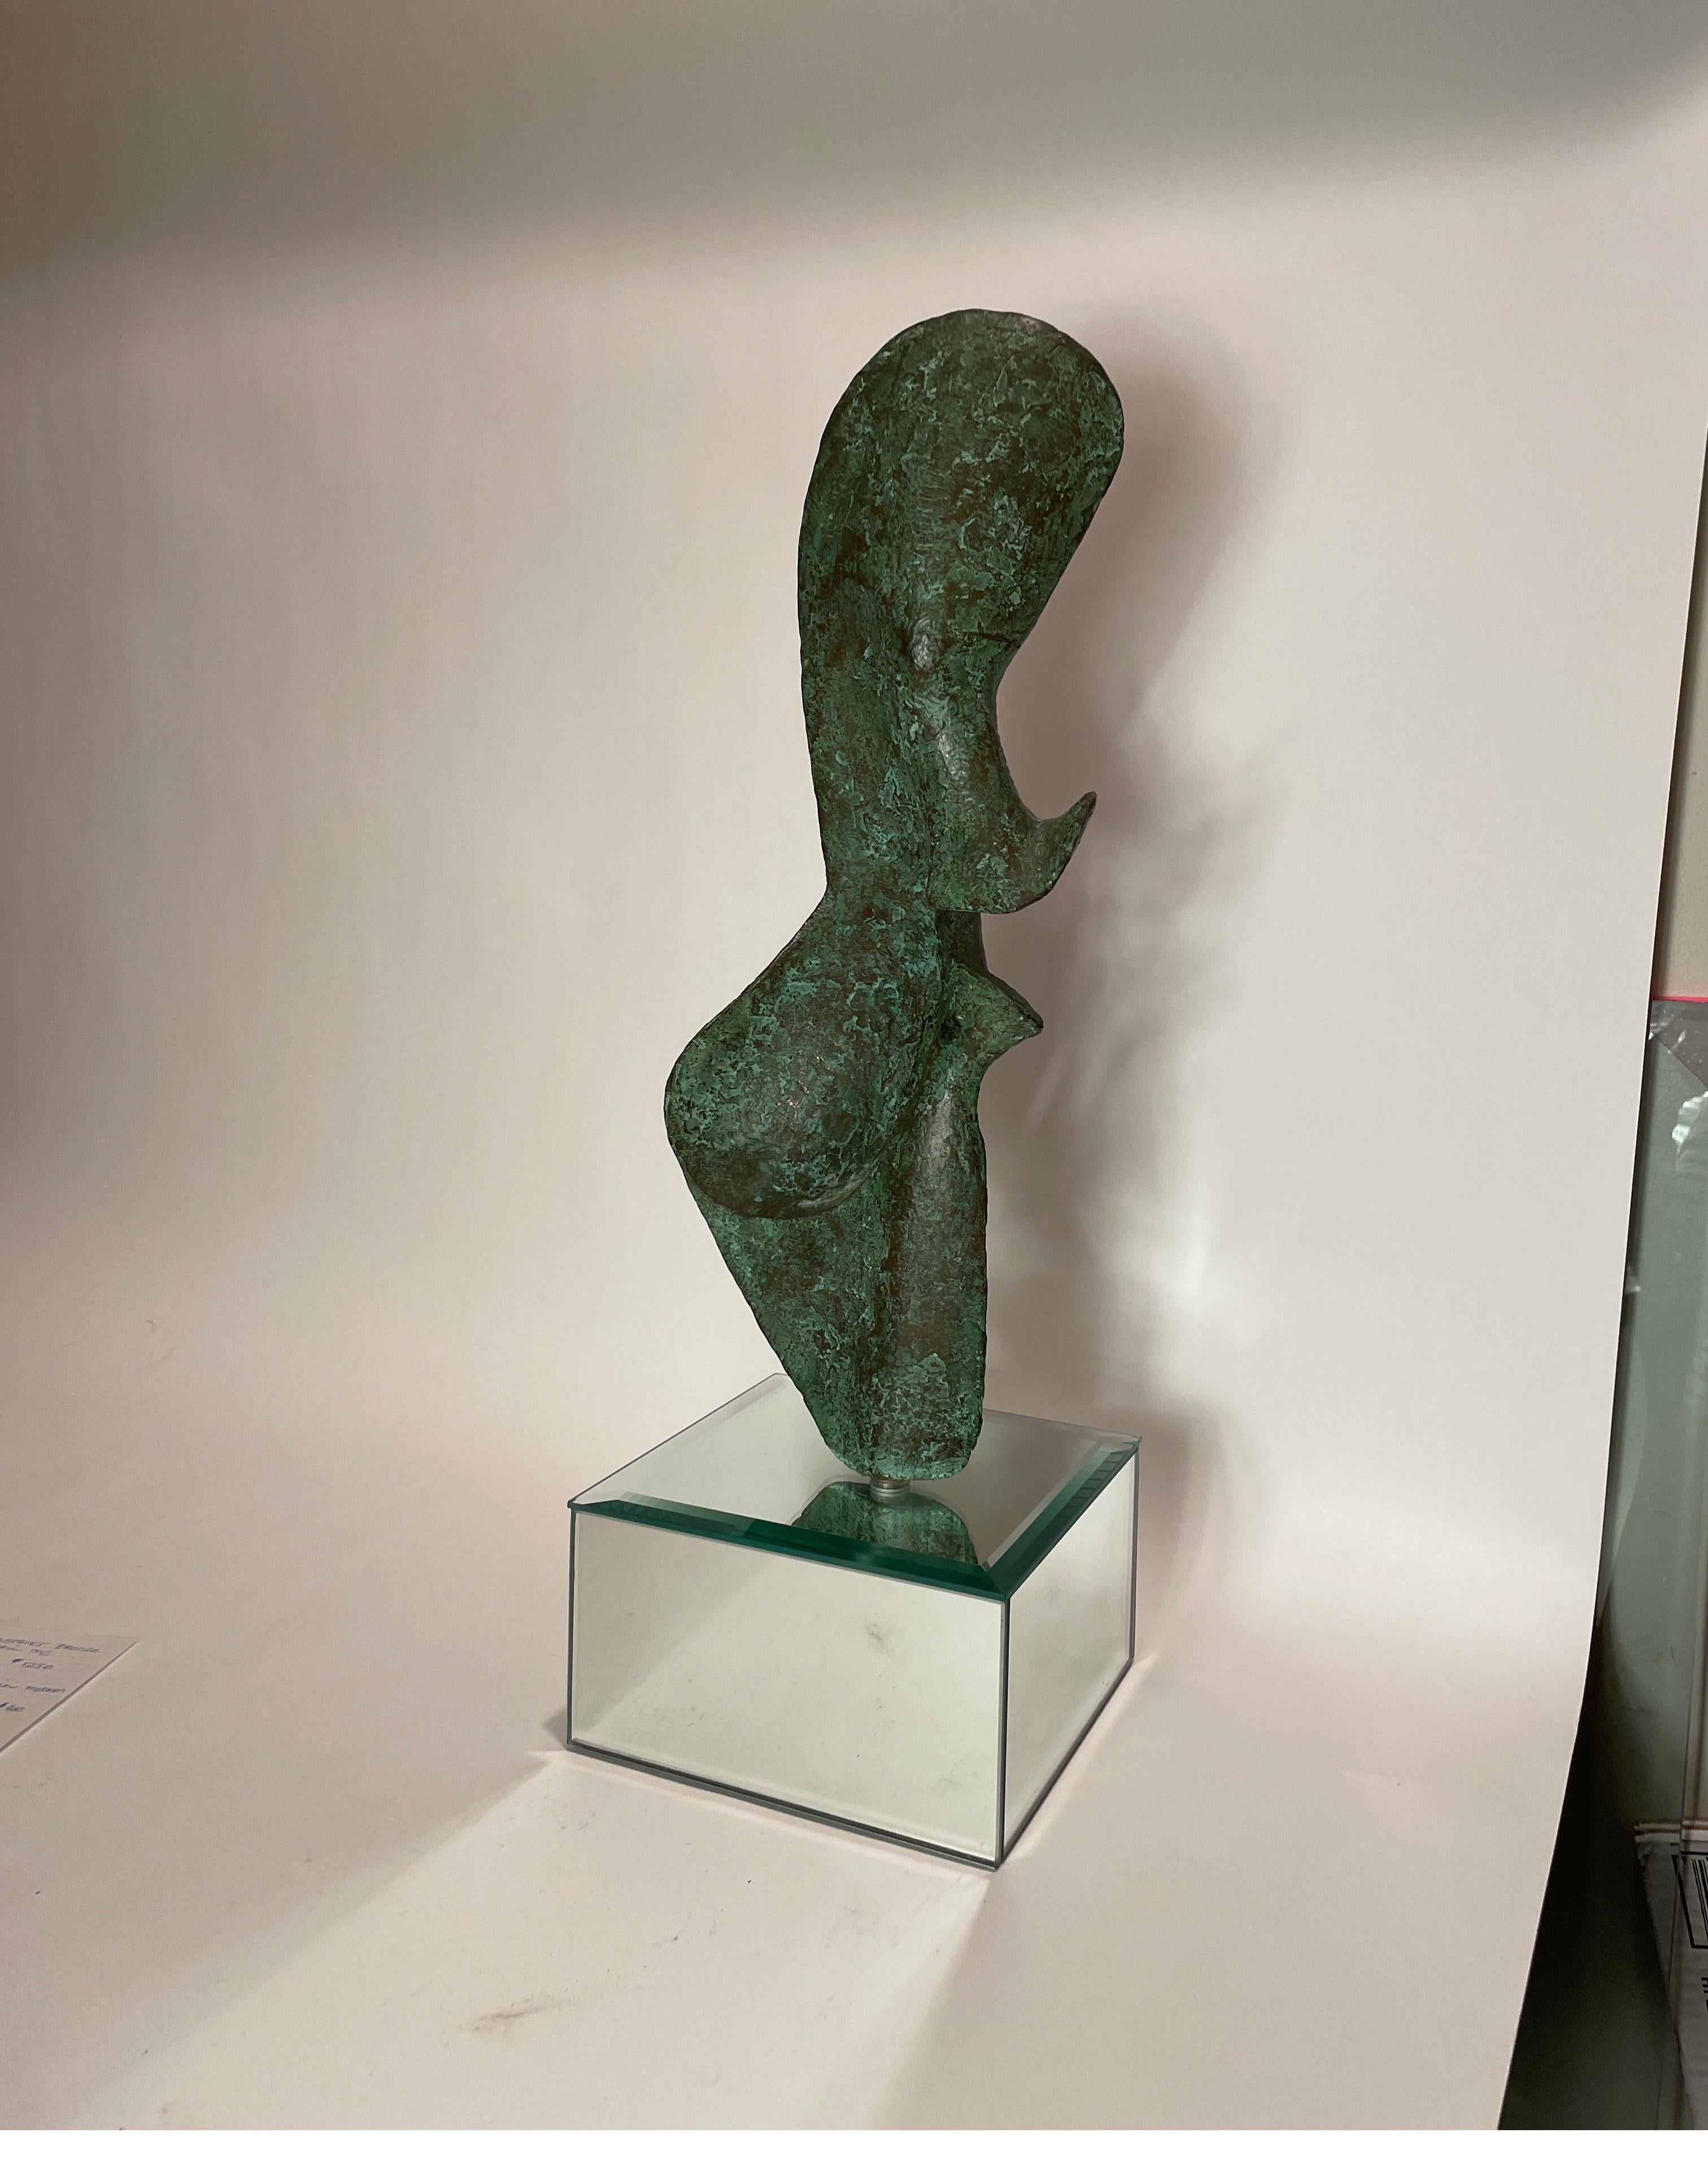 Signed bronze sculpture by Leonardo Nierman on a mirror base.
dimensions include base.